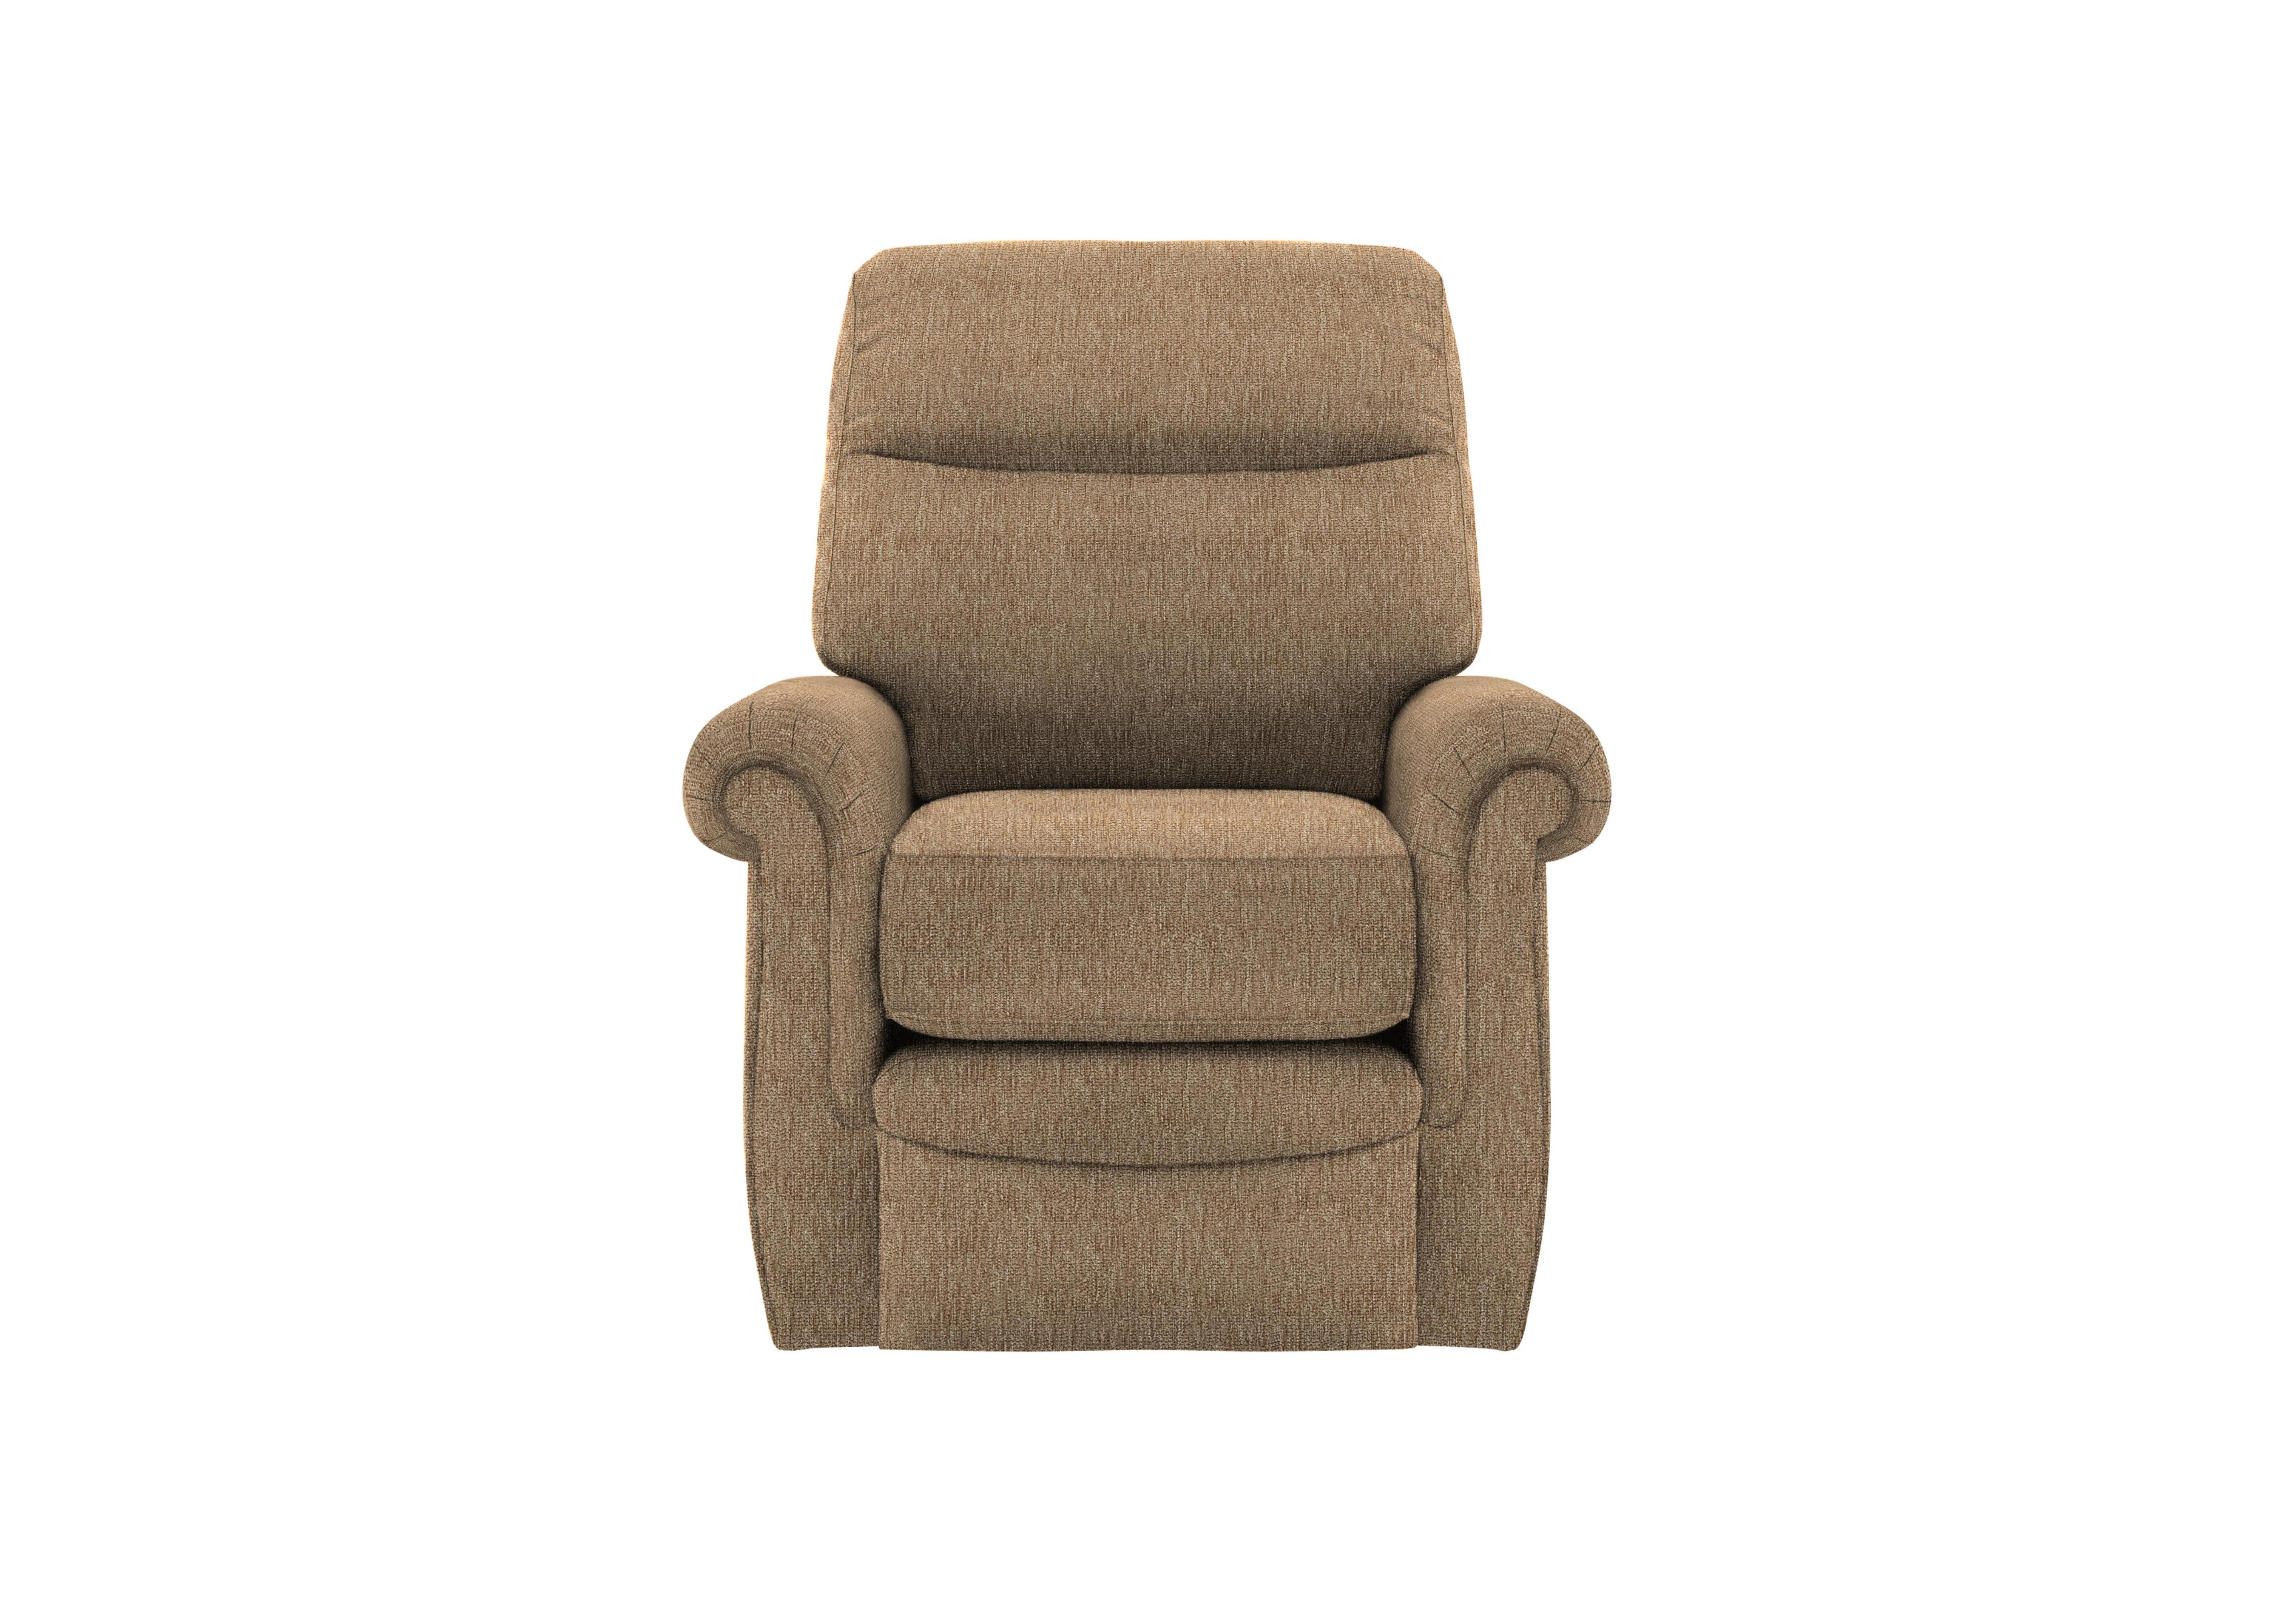 Avon Small Fabric Armchair in A070 Boucle Cocoa on Furniture Village